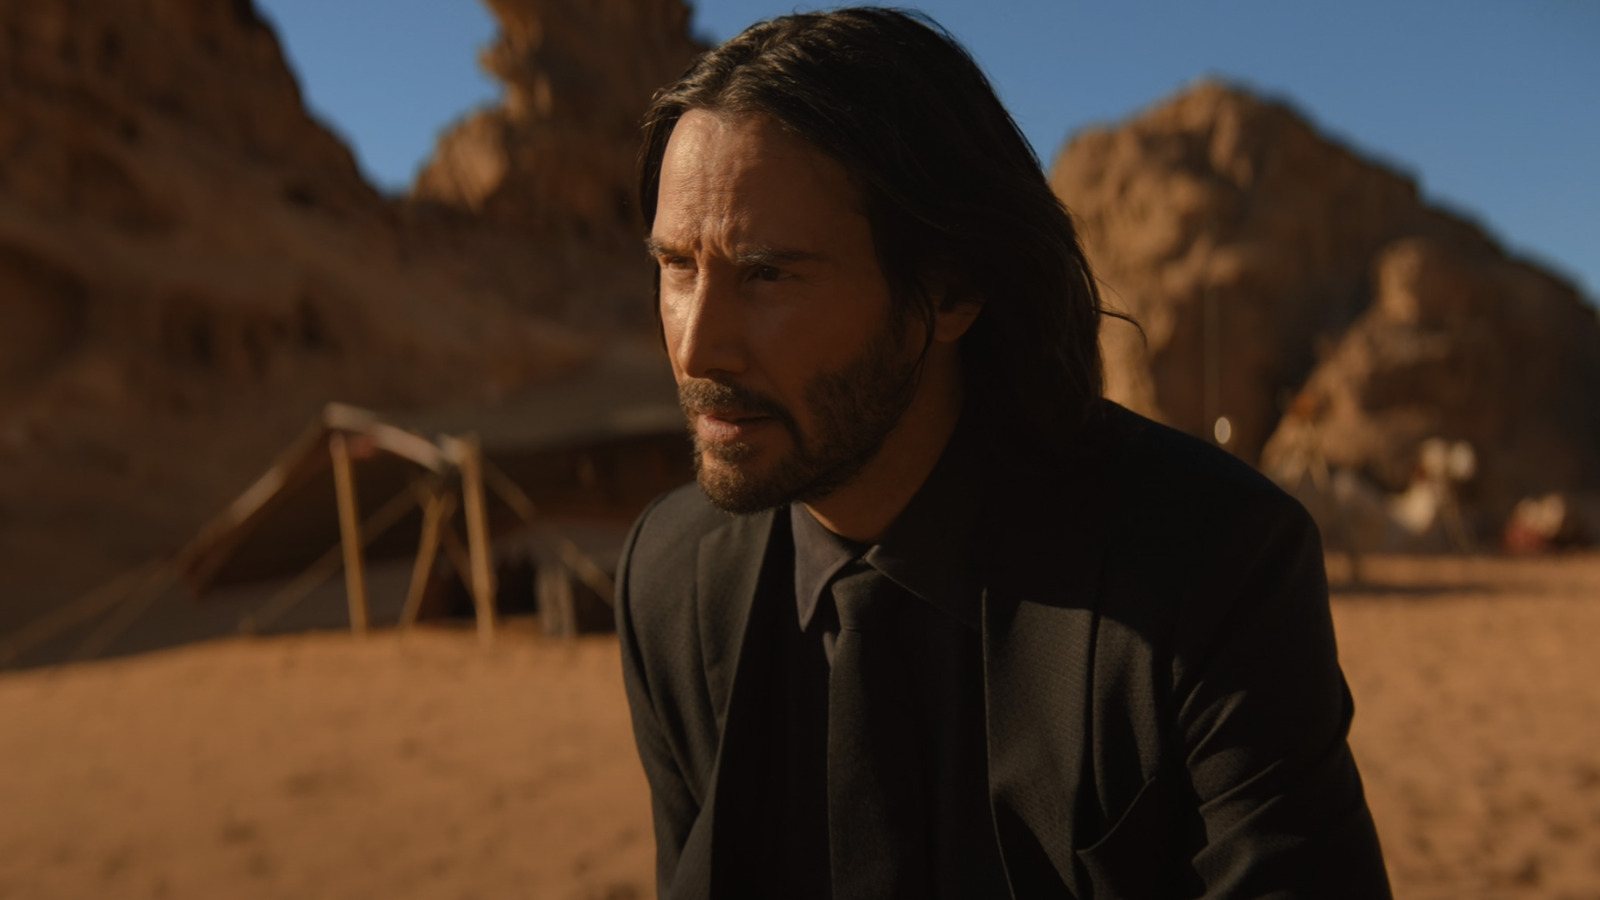 The King Of Jordan Gave John Wick 4 A Helicopter - Keanu's Reaction Is ...